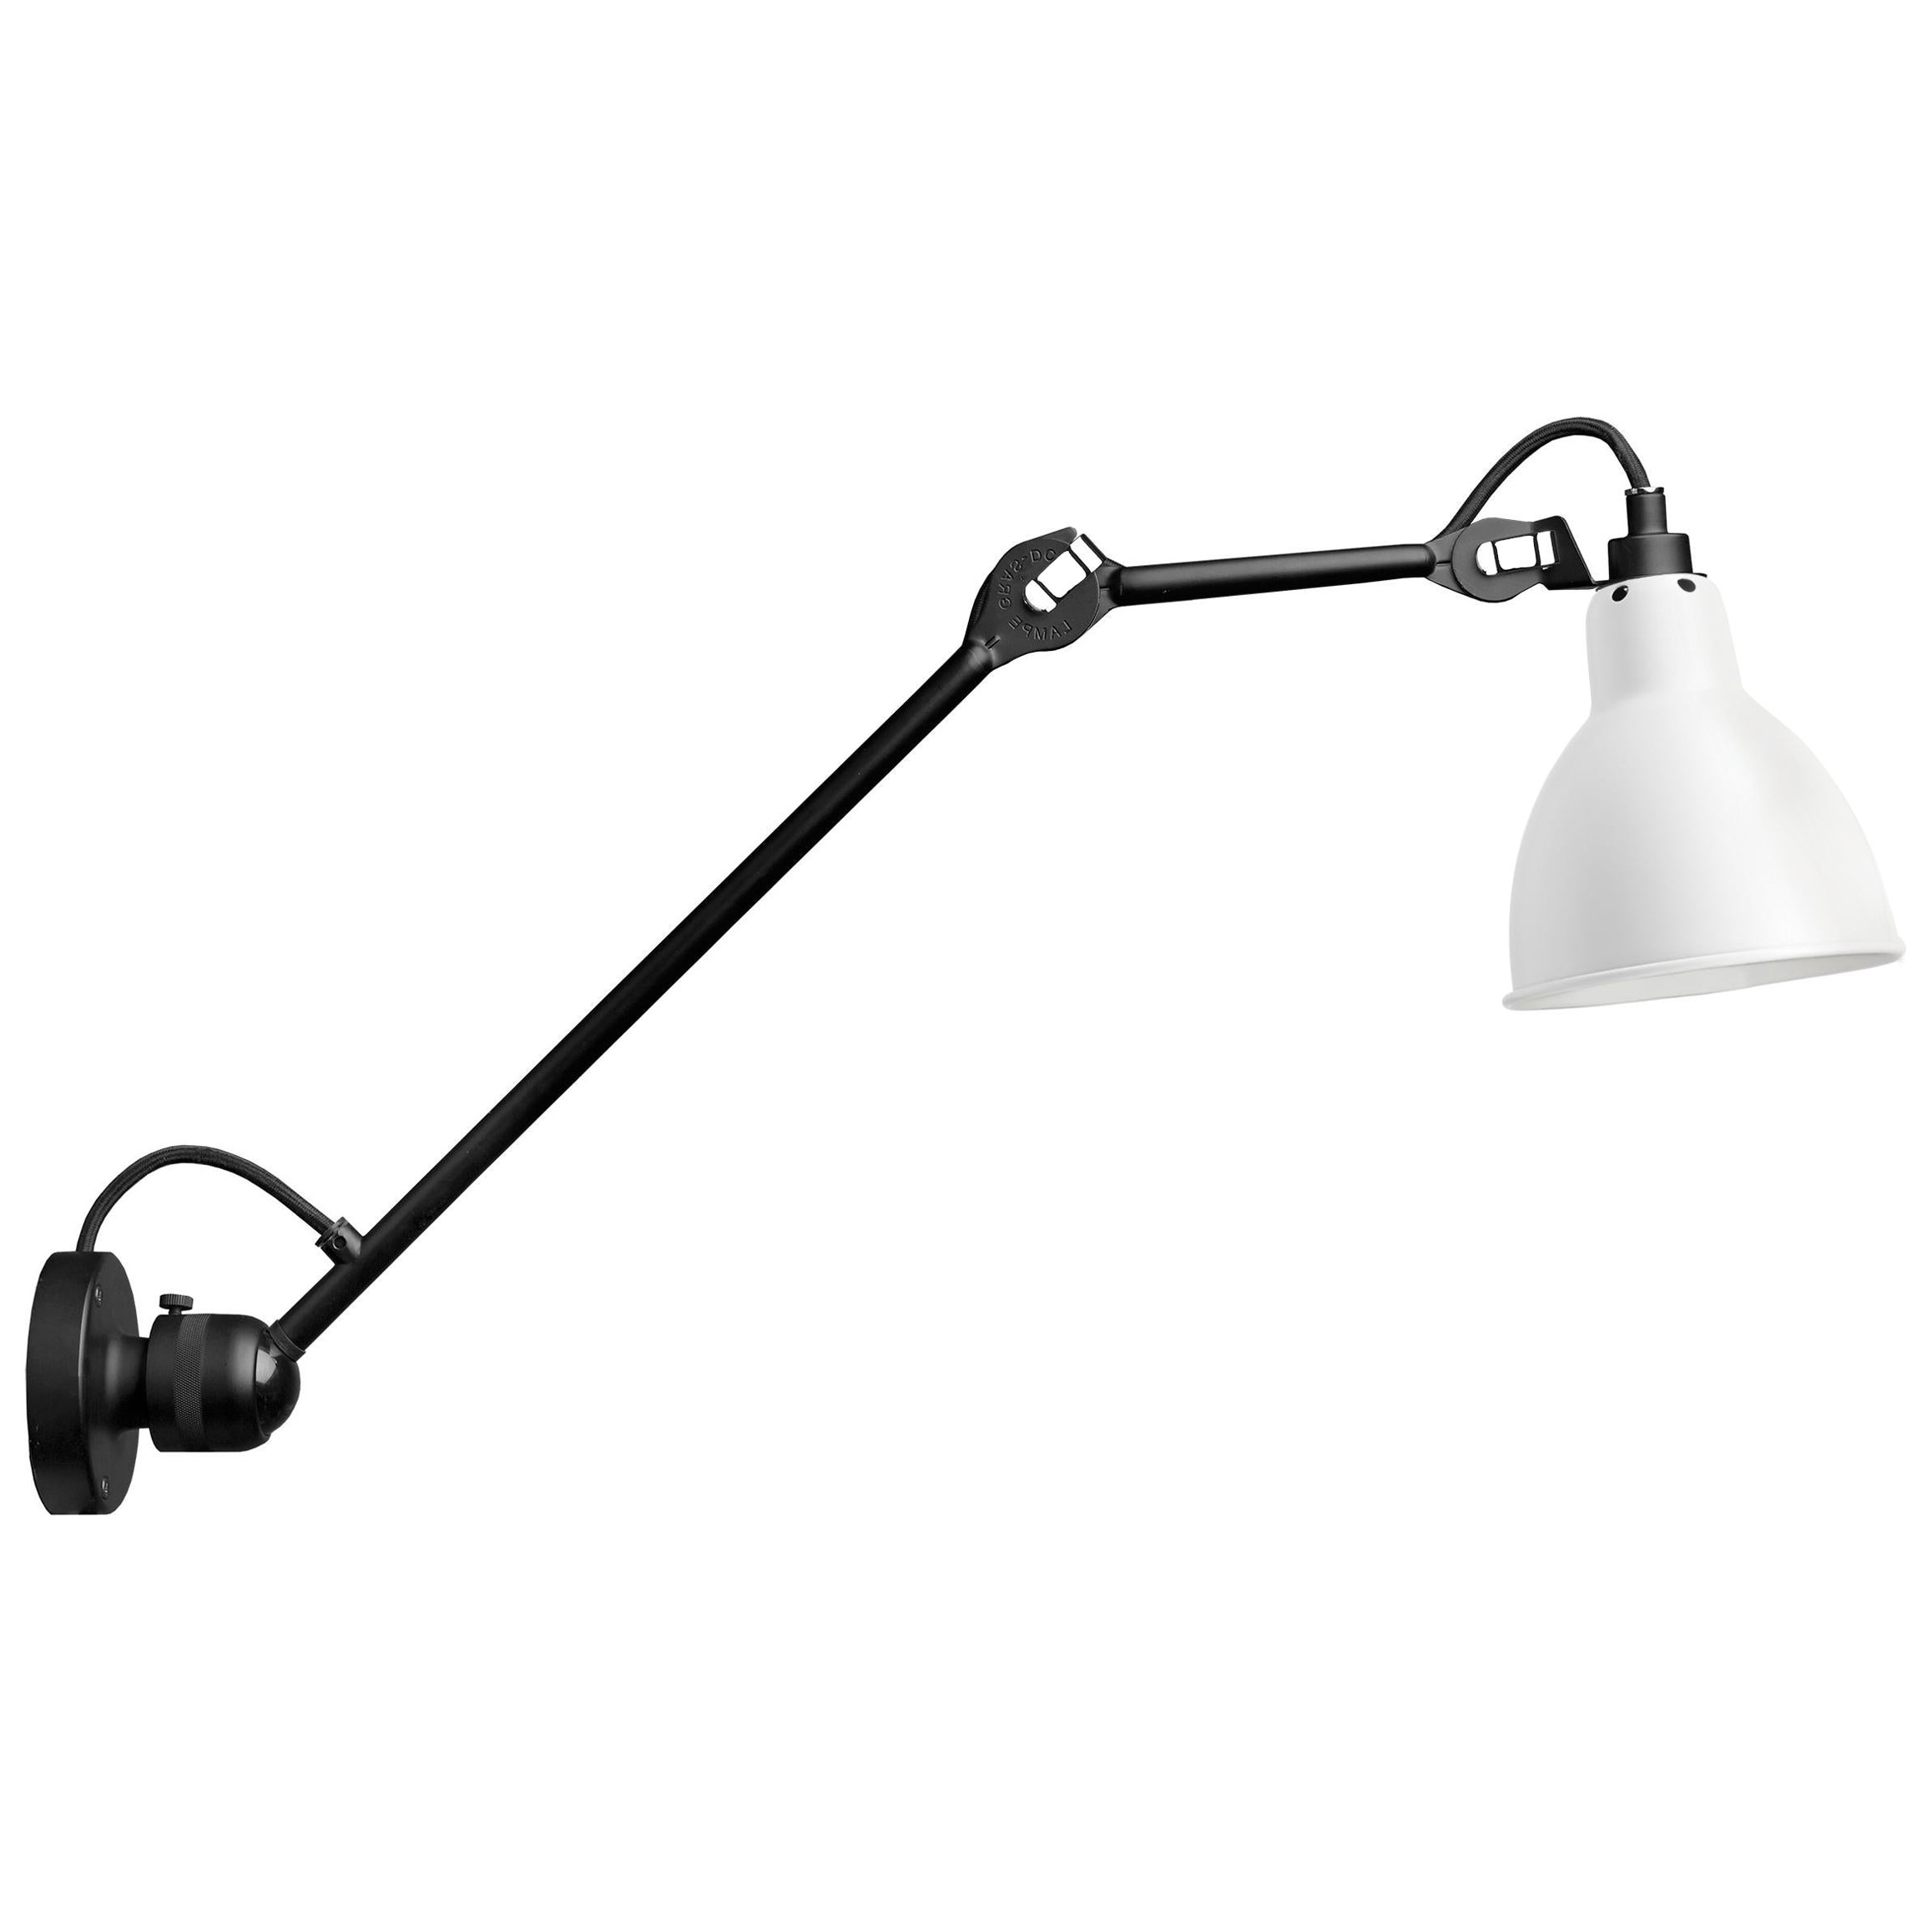 DCW Editions La Lampe Gras N°304 L40 Wall Lamp in Black Arm and White Shade For Sale